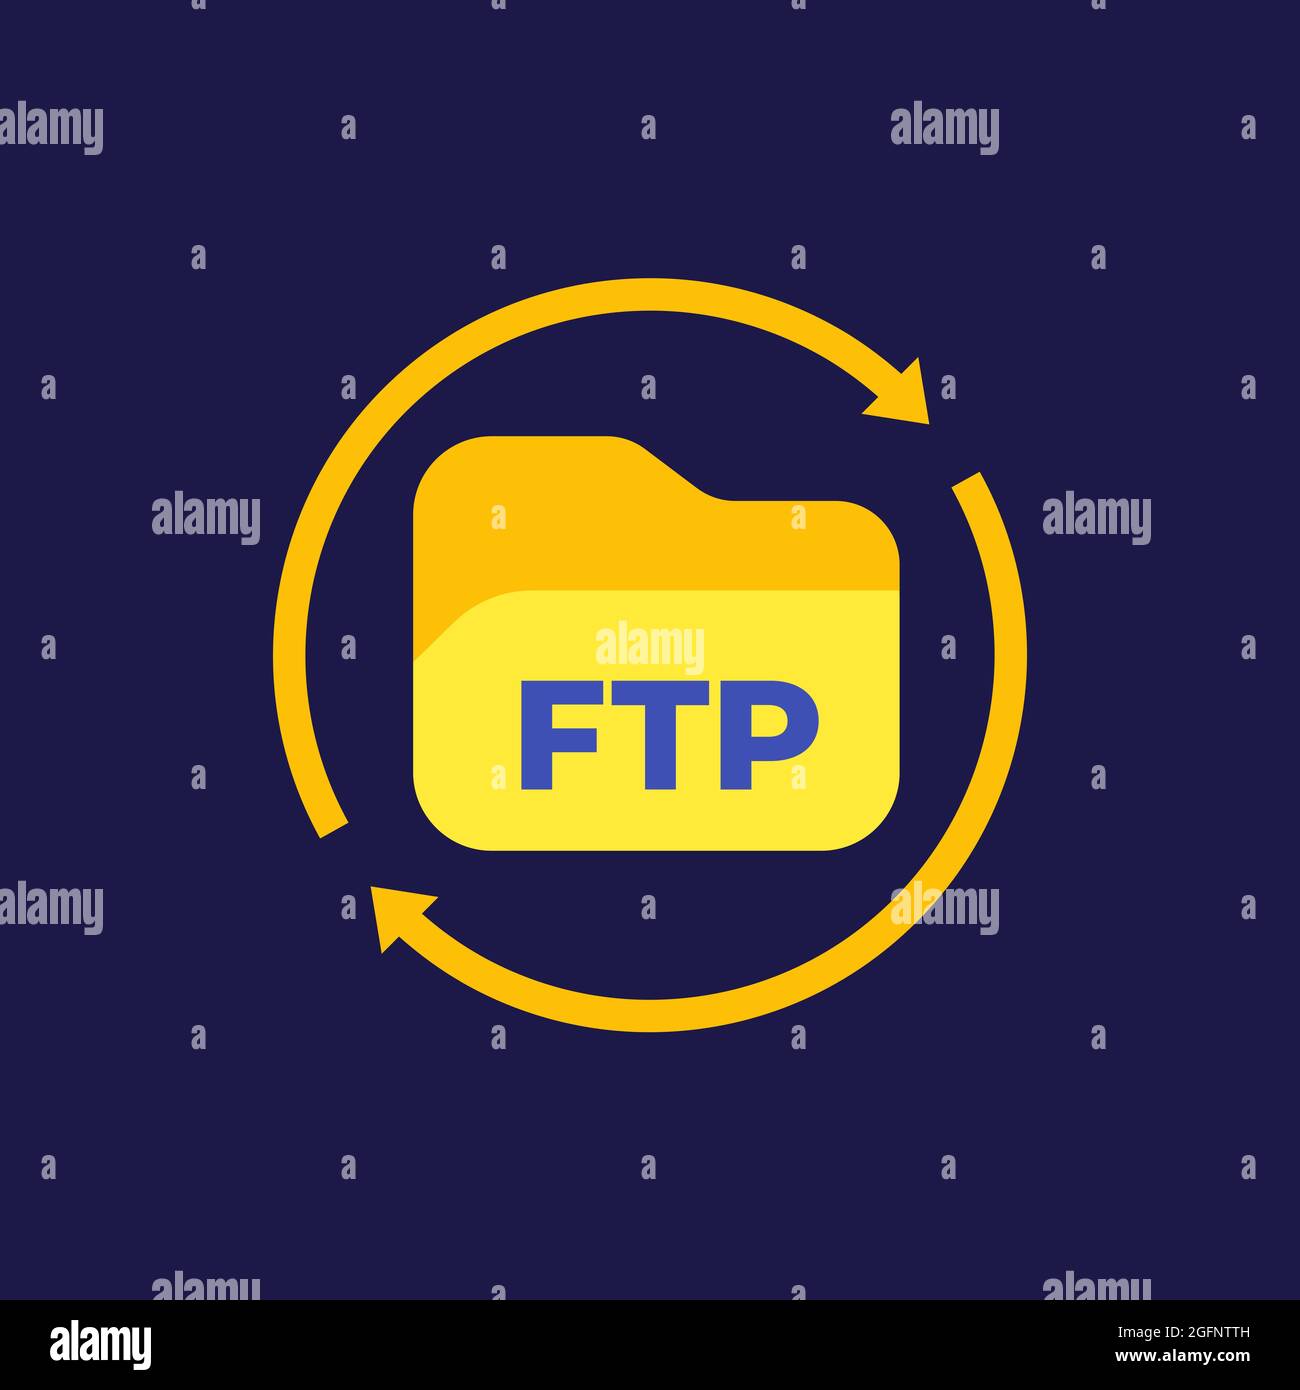 File transfer protocol Stock Vector Images - Alamy